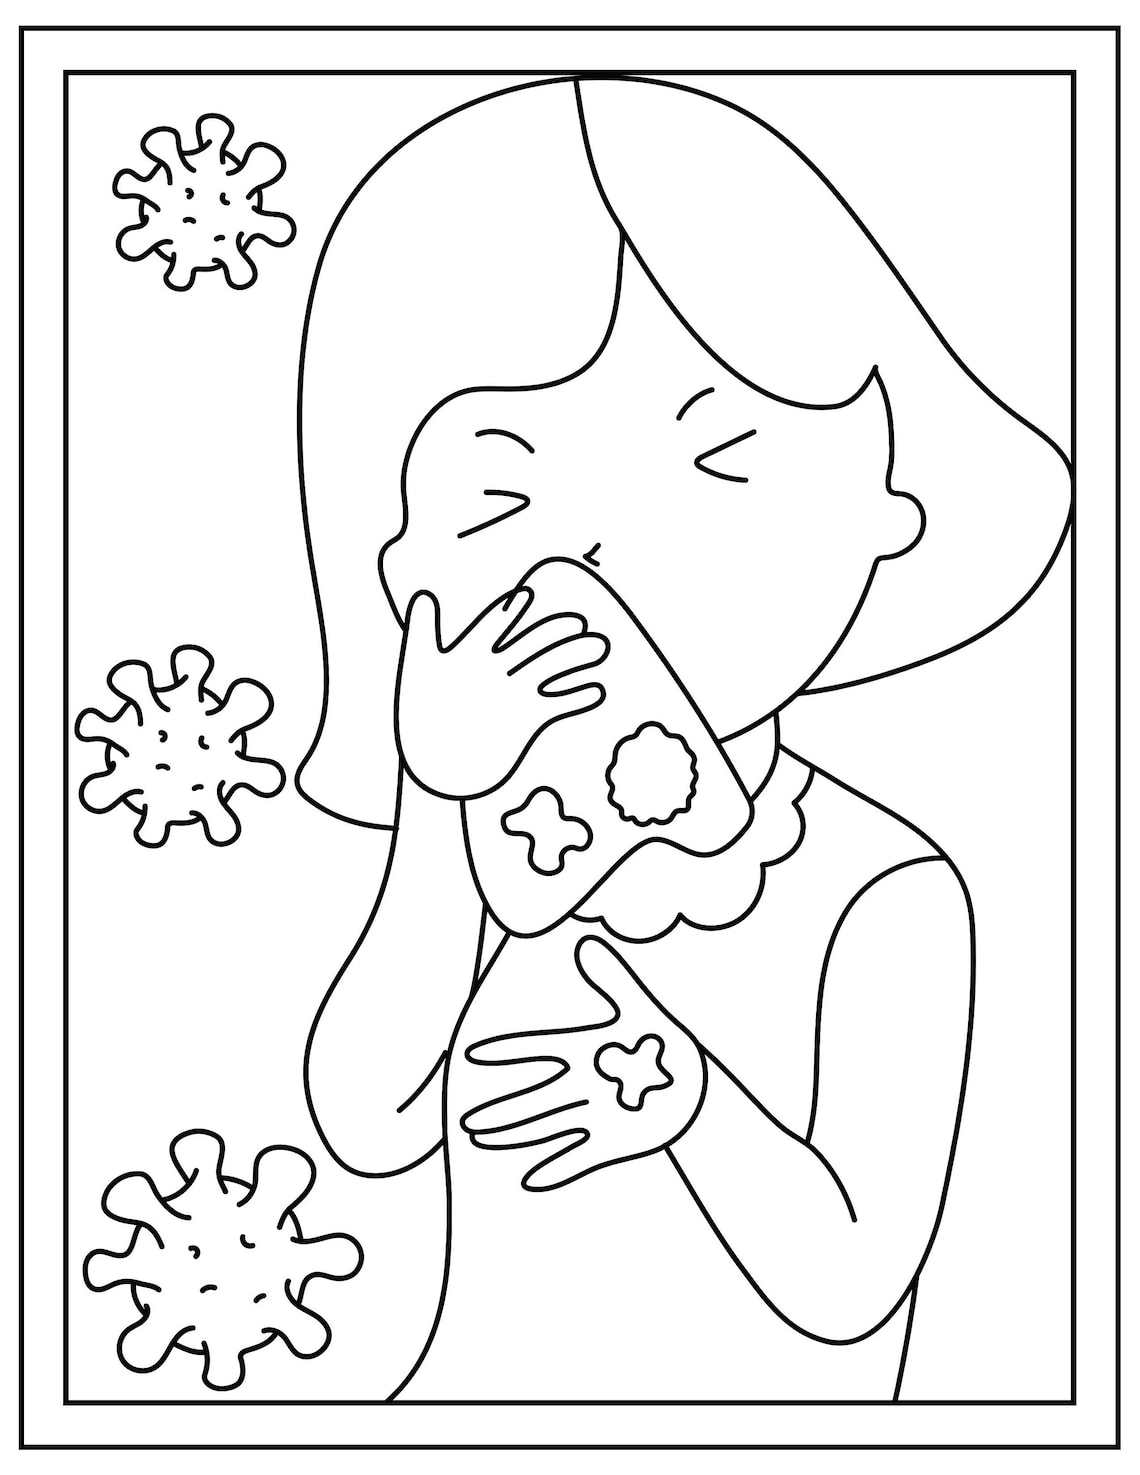 Printable Germ Coloring Pages